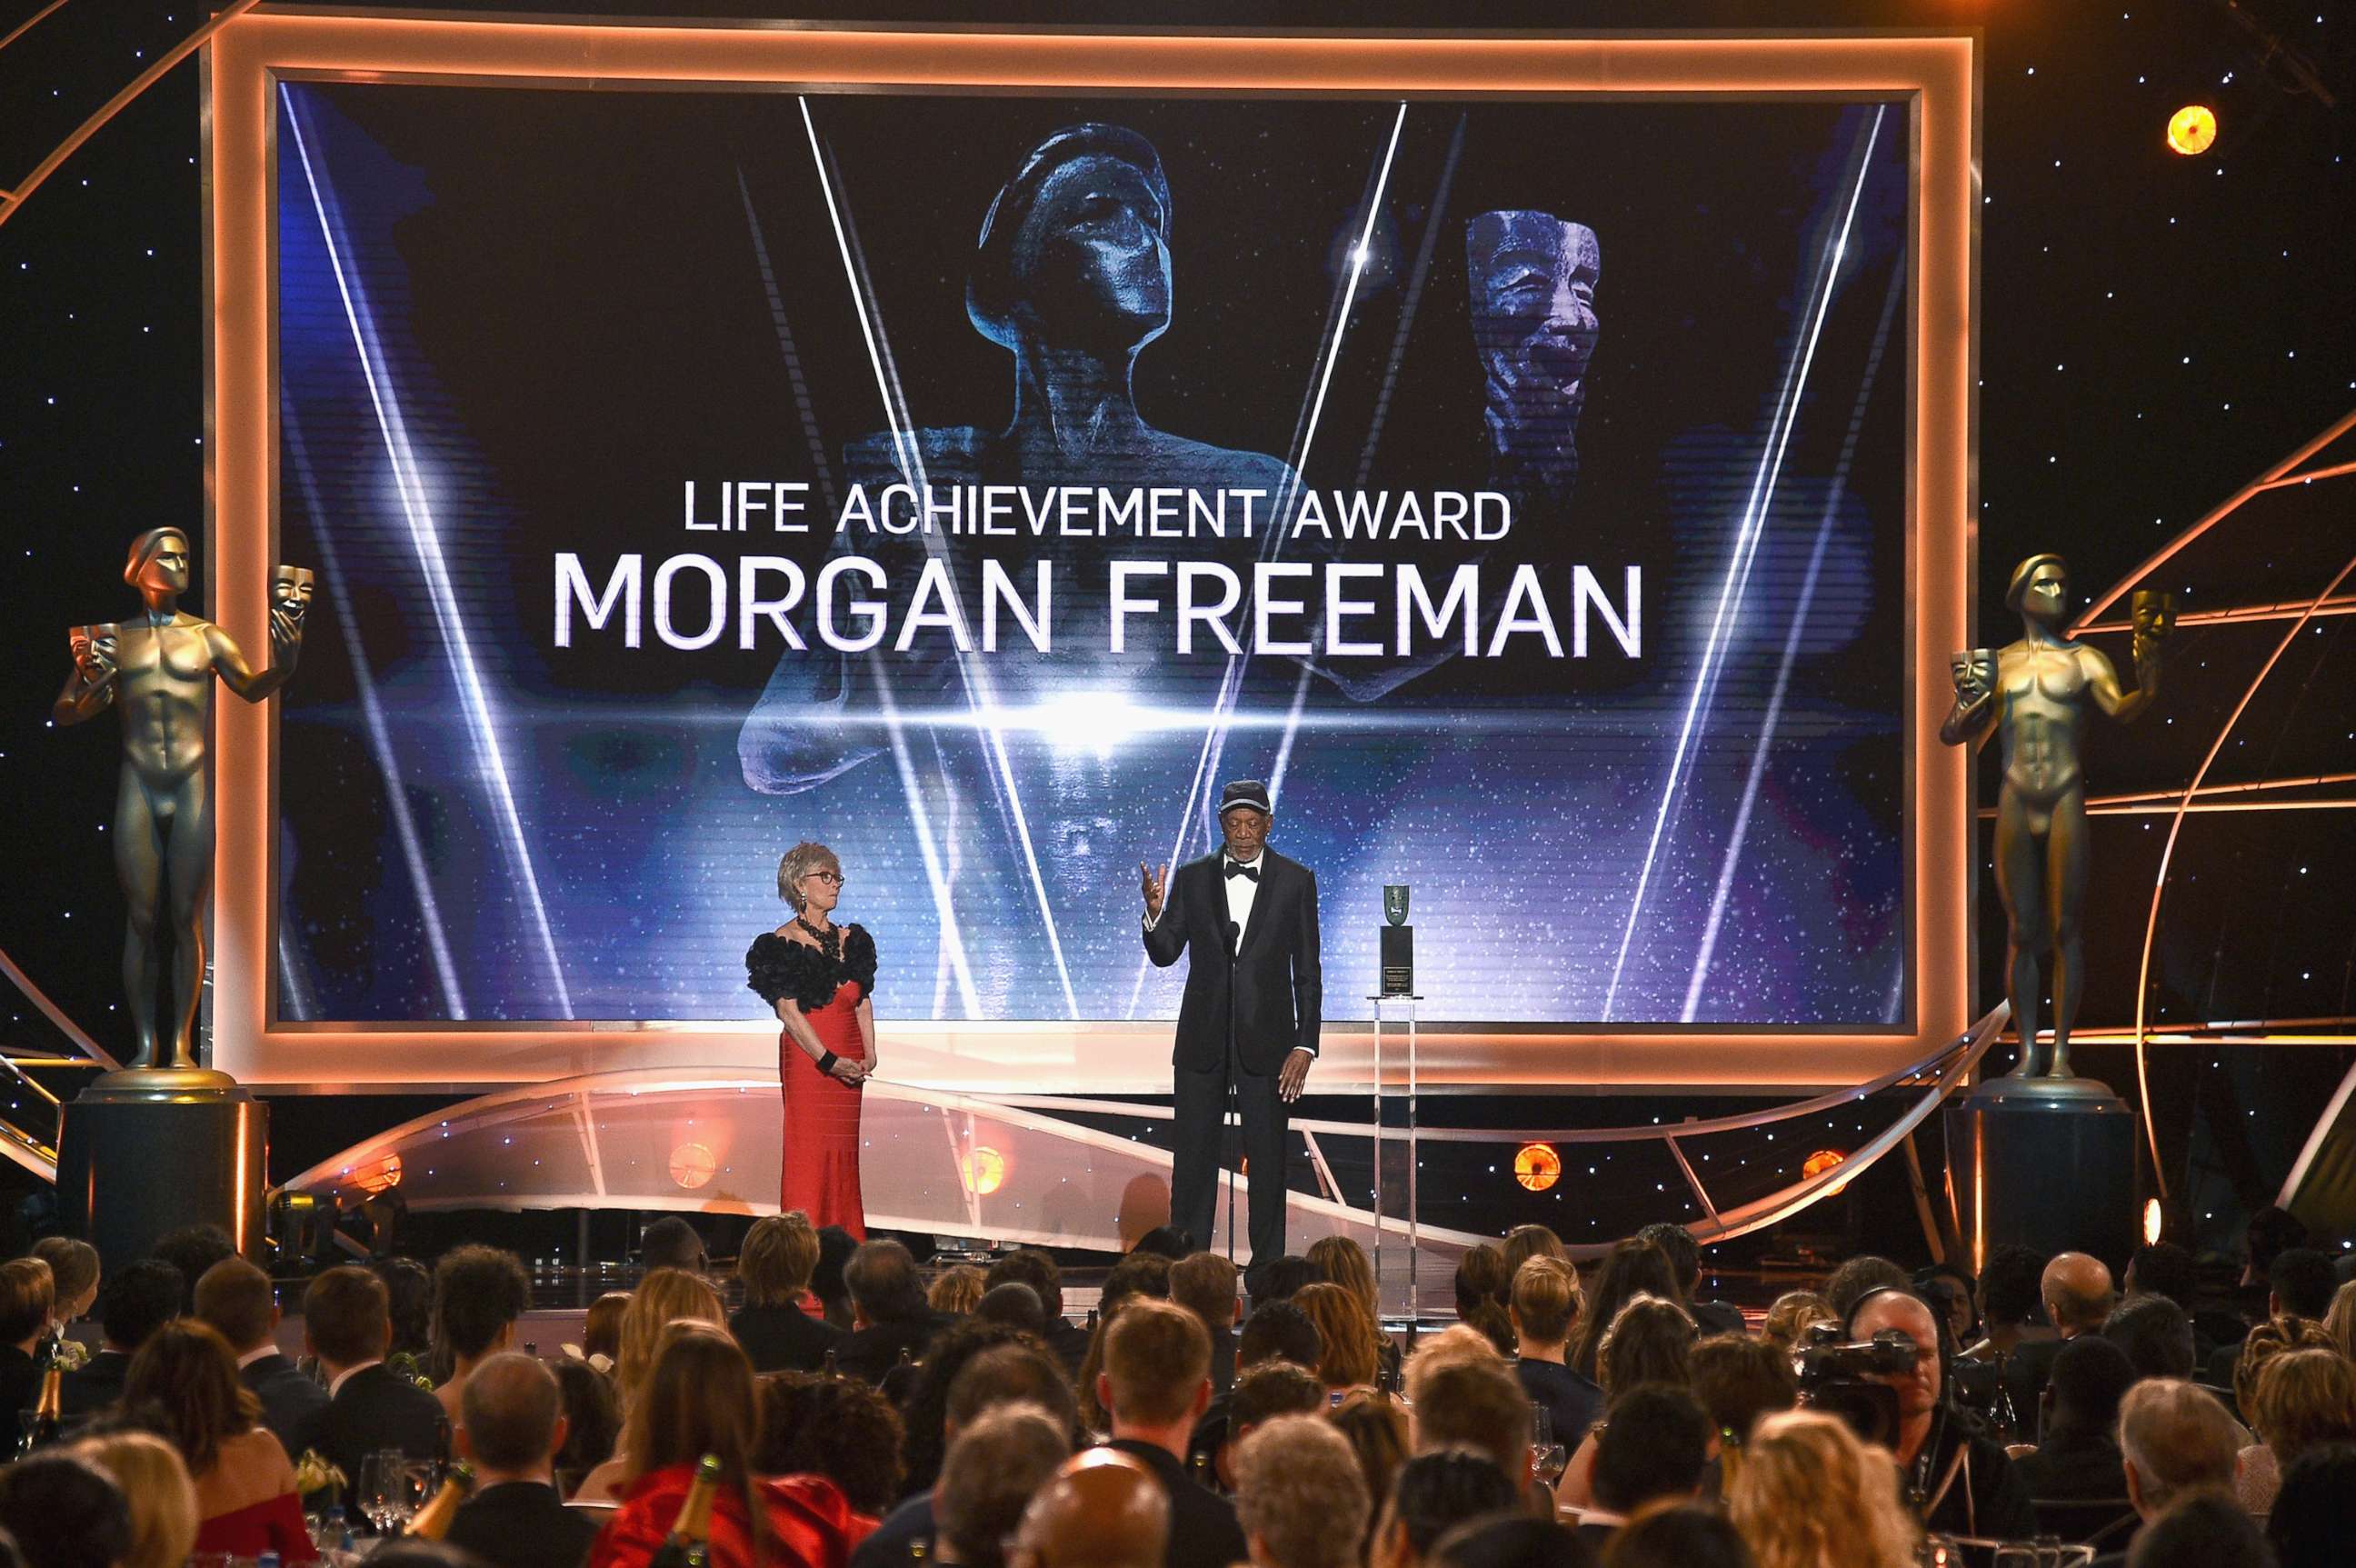 PHOTO: Morgan Freeman accept a lifetime achievement award onstage during the 24th Annual Screen Actors' Guild Awards at The Shrine Auditorium, Jan. 21, 2018 in Los Angeles, Calif. Actress Rita Moreno is at left.